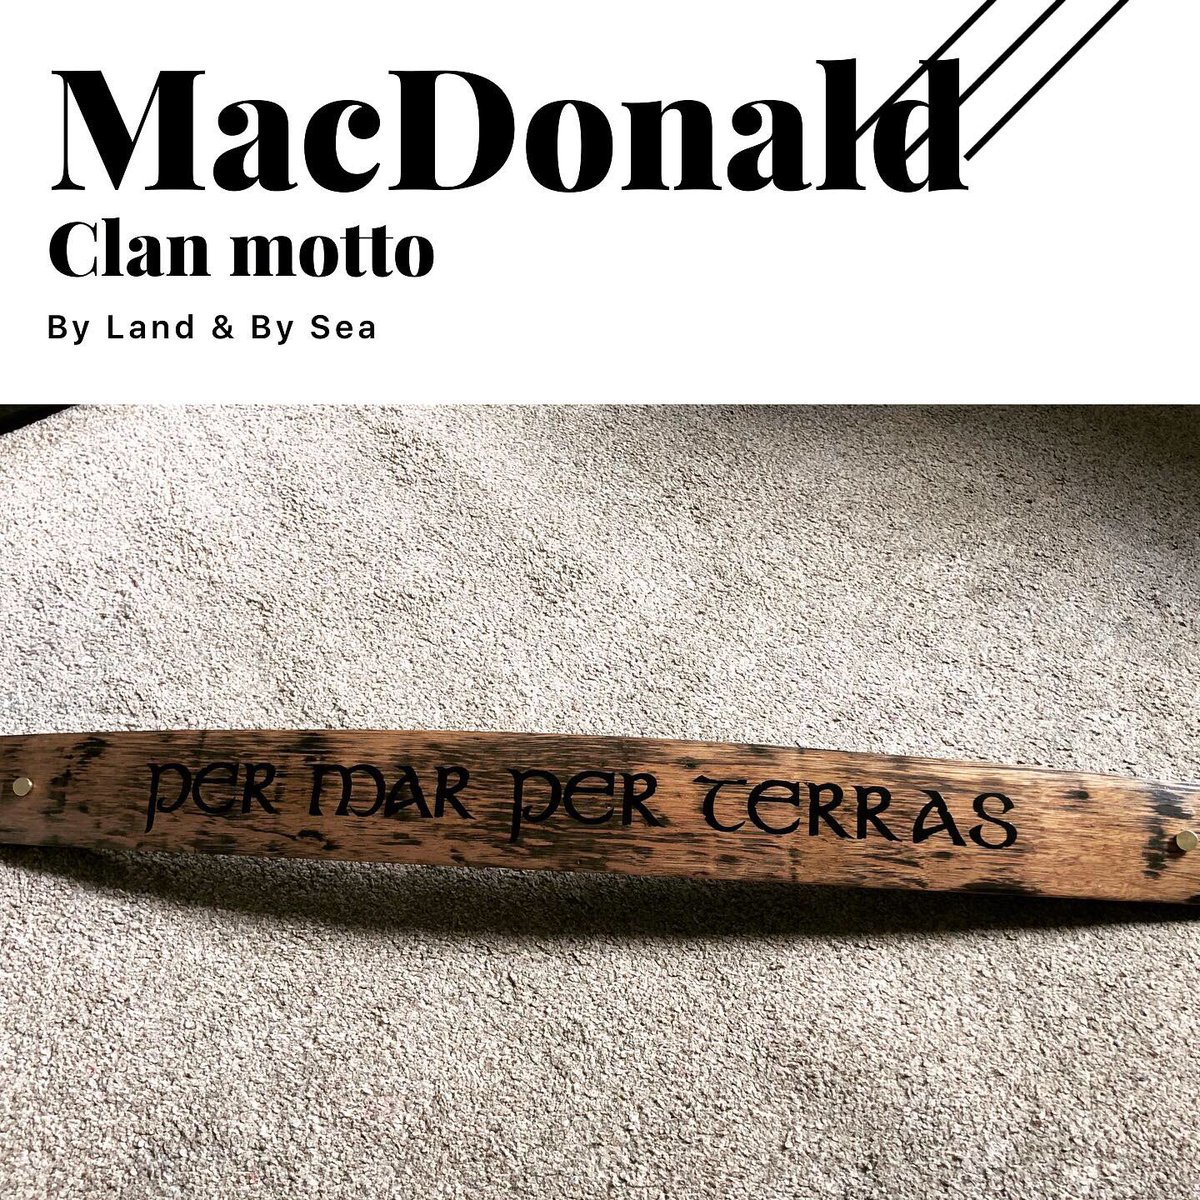 Whisky stave sign with the MacDonald clan motto making its way stateside 🇺🇸 The back of the stave has its black char detail due to the barrel being set on fire during production, this gives the whisky its delicious smoky character 🔥🥃#scottishclans #shopsmallbusiness #handmade